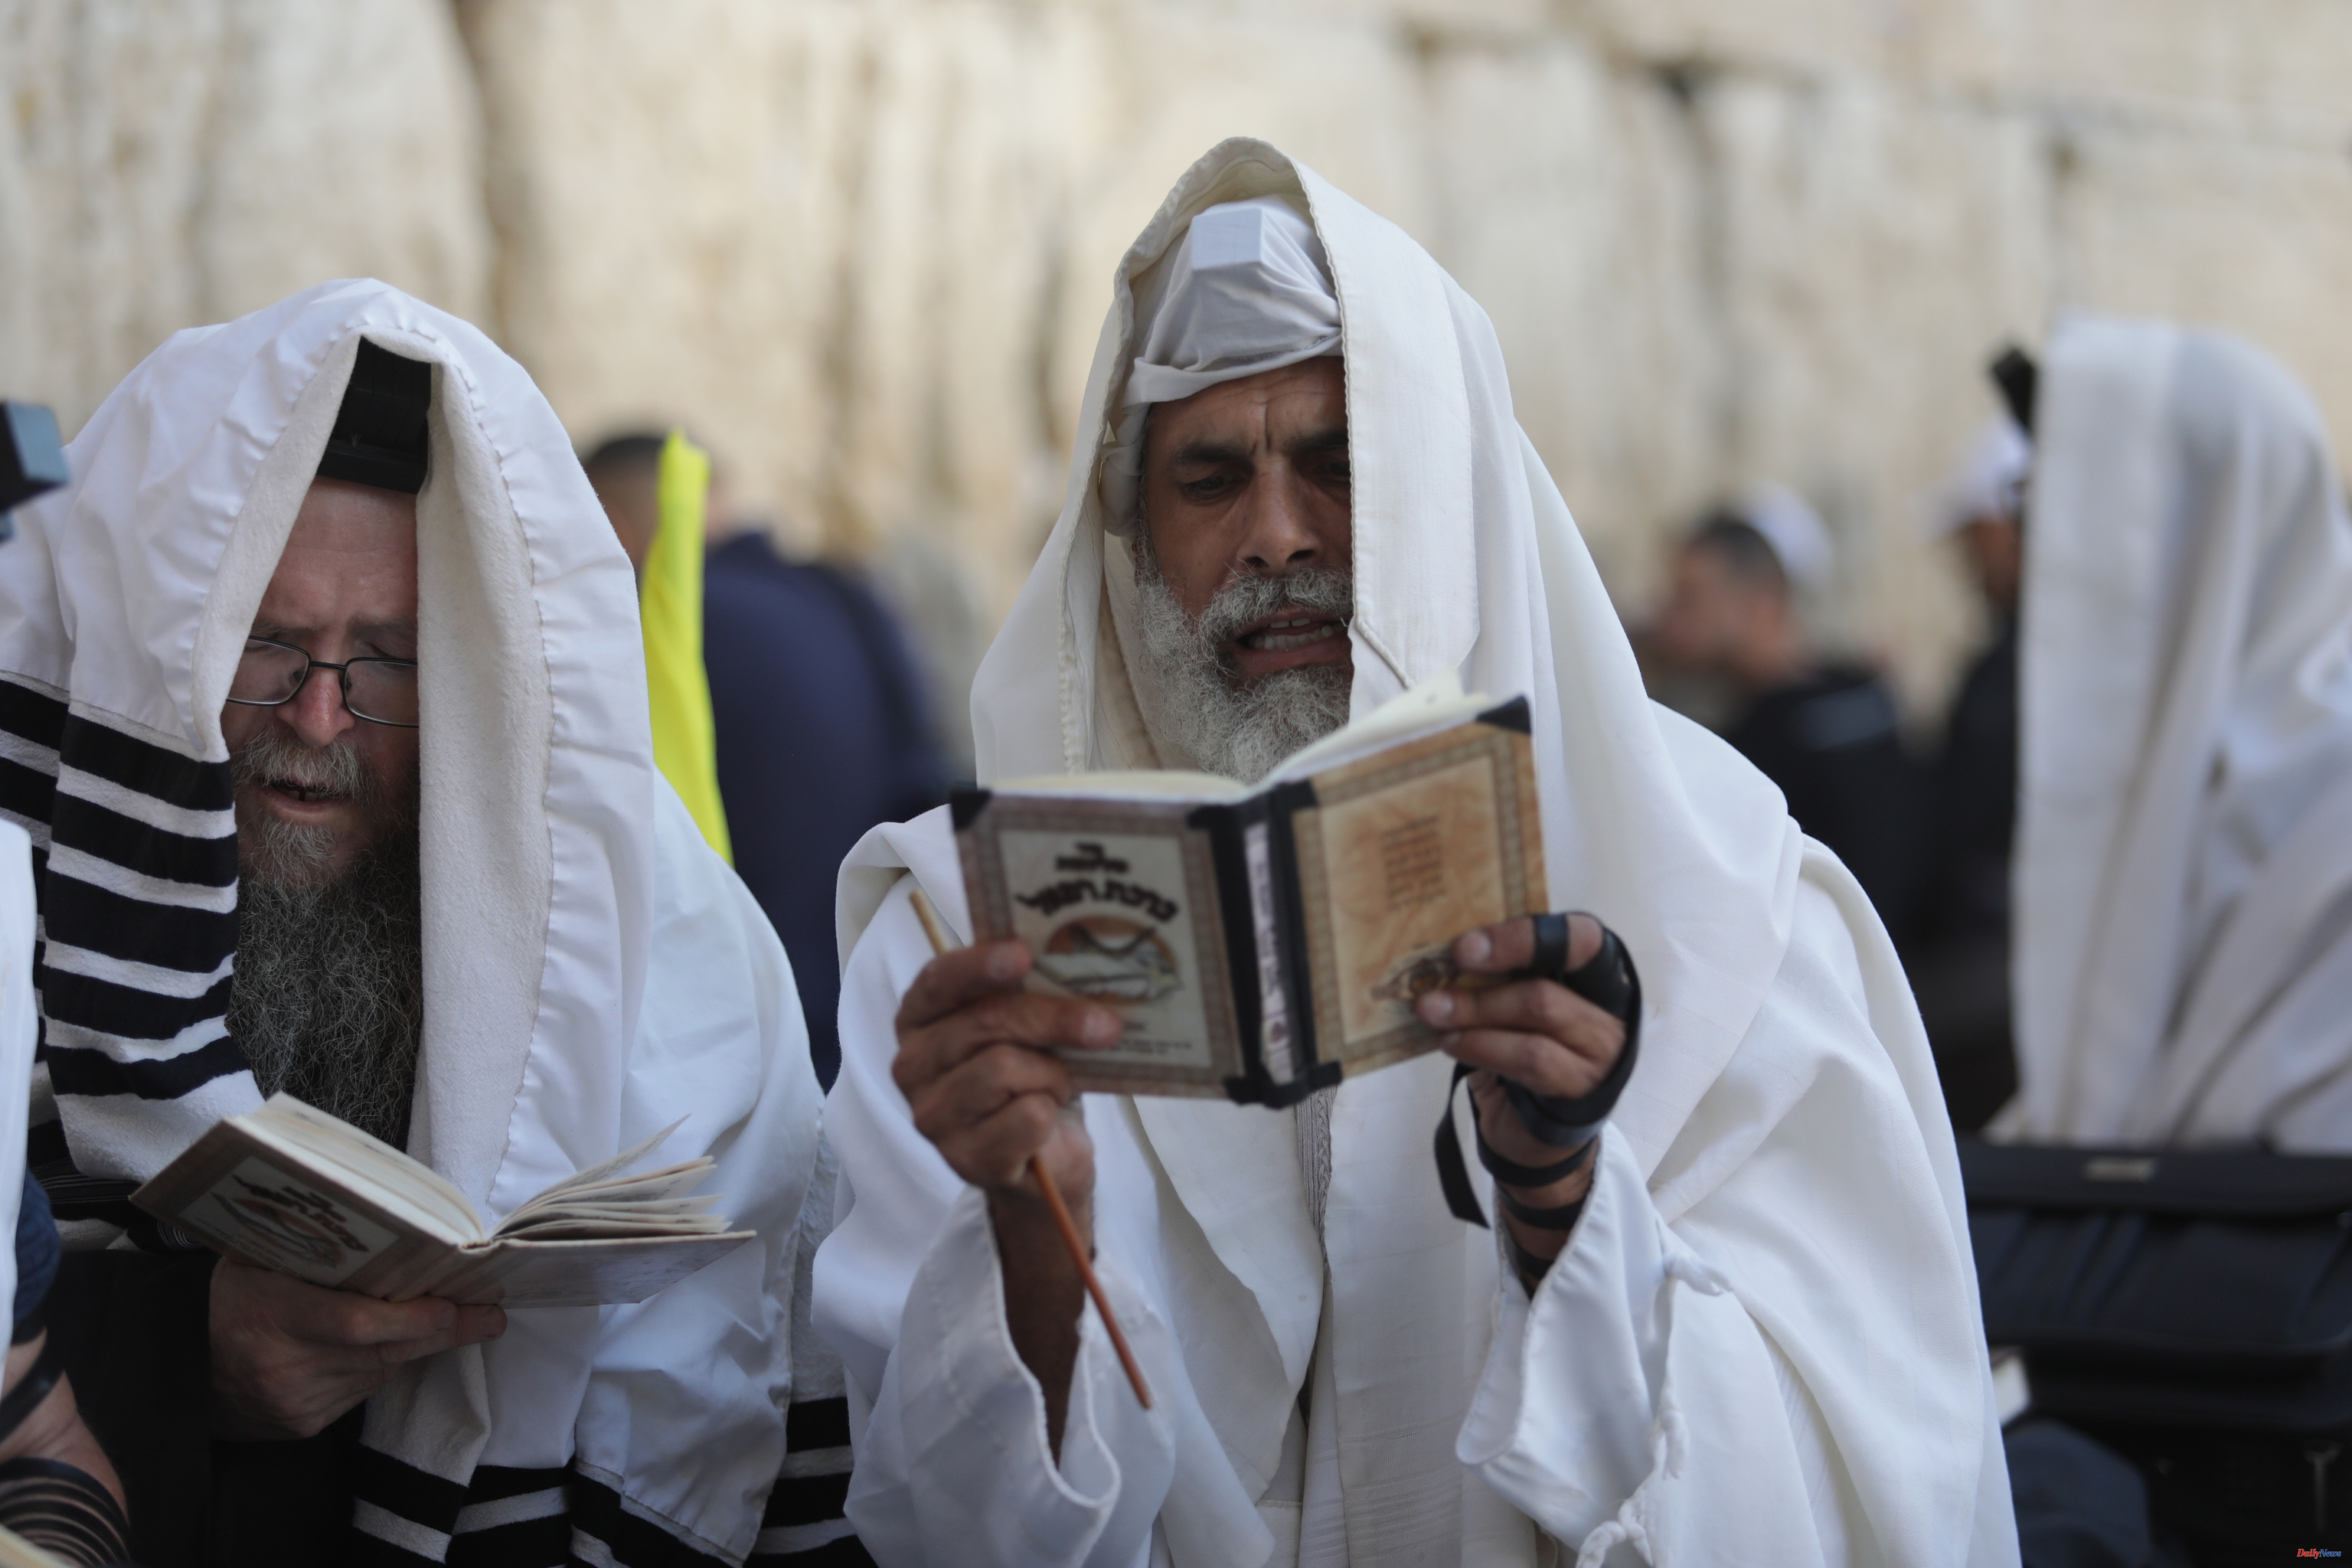 Religion When is Yom Kippur and how is it celebrated in the Jewish community?